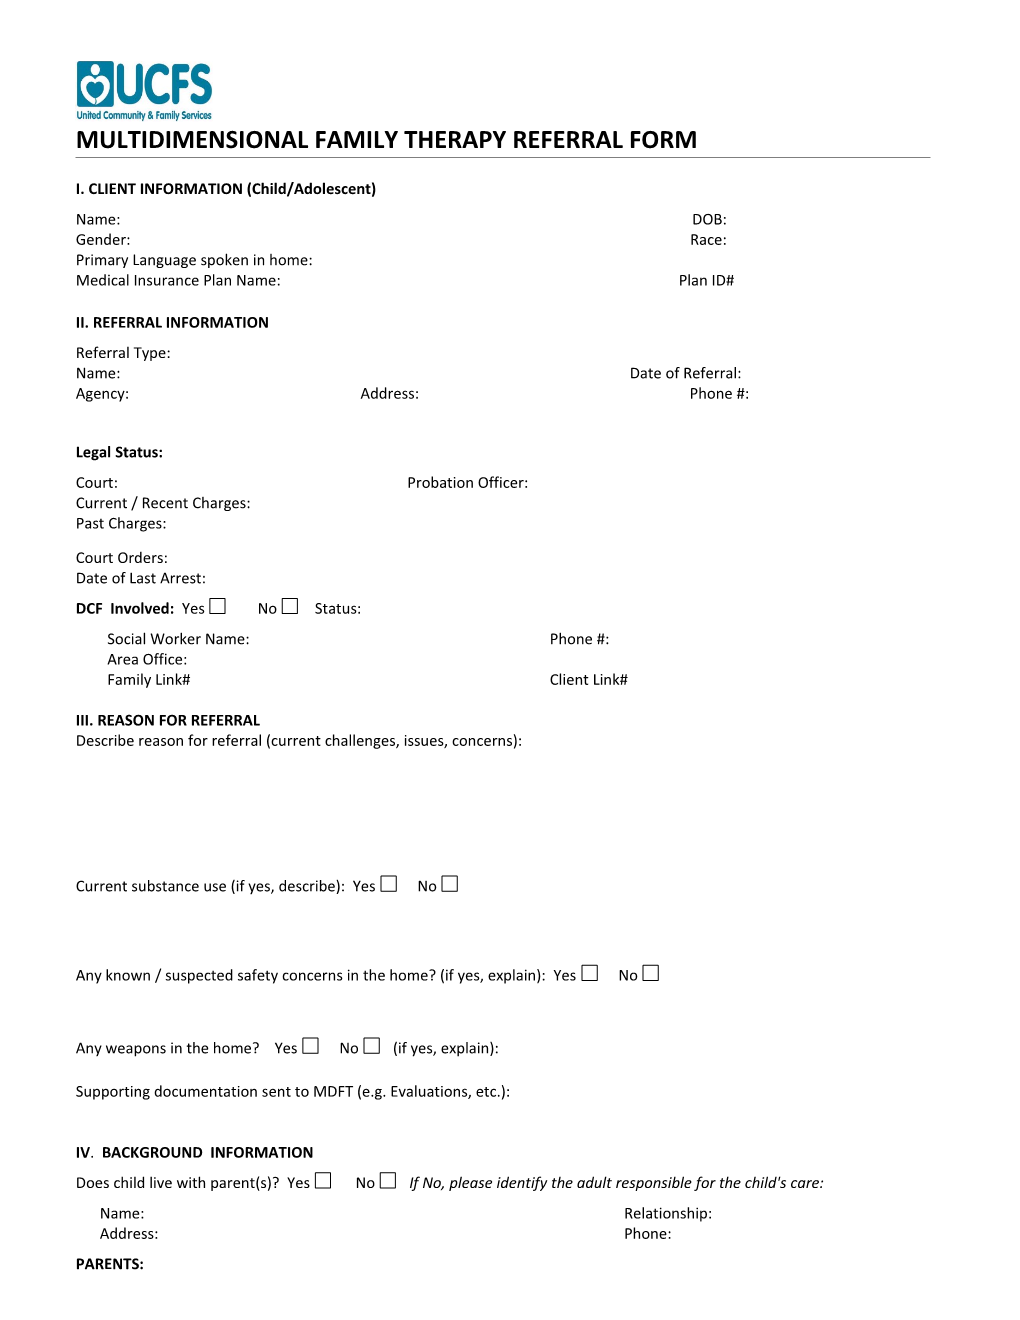 Multidimensional Family Therapy Referral Form